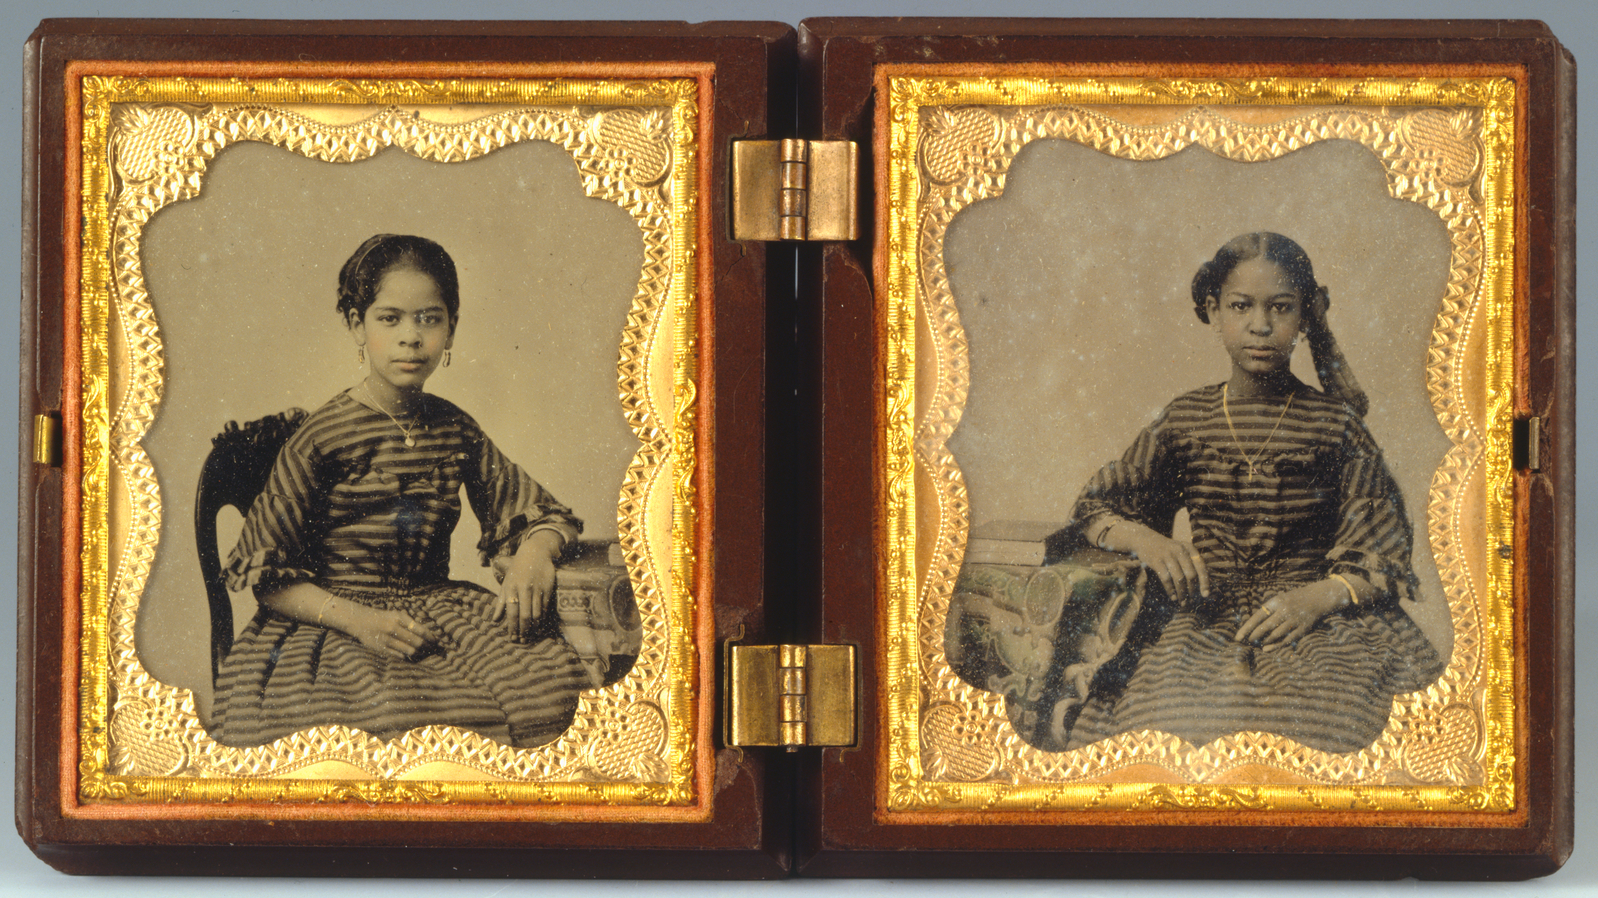 Two black and white photographs on each side of a hinged wood and gold case show two Black girls wearing dresses in matching fabric and jewelry.